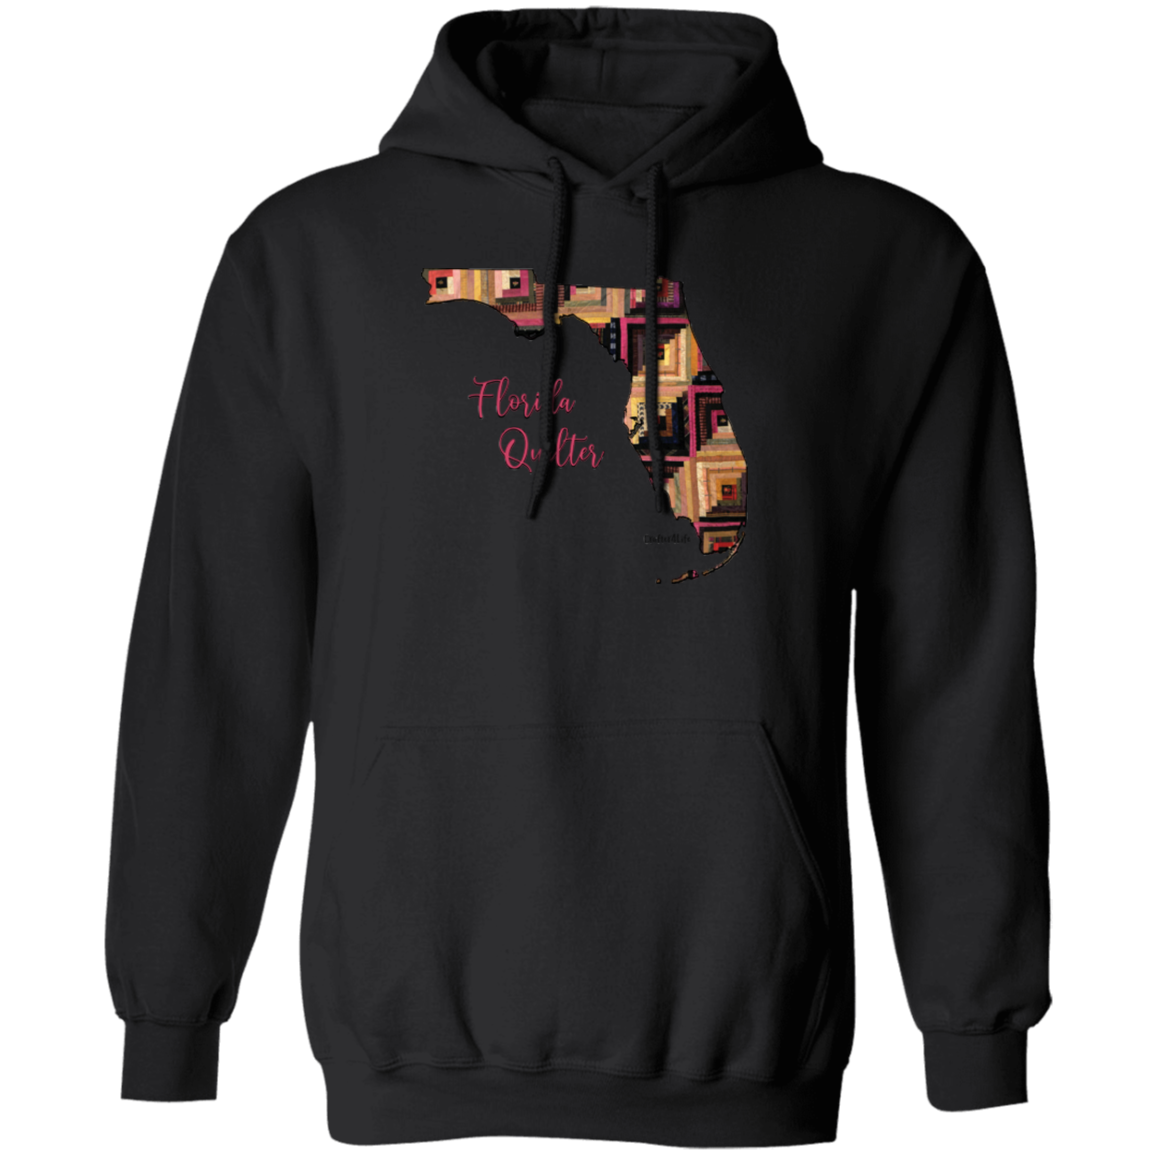 Florida Quilter Pullover Hoodie, Gift for Quilting Friends and Family